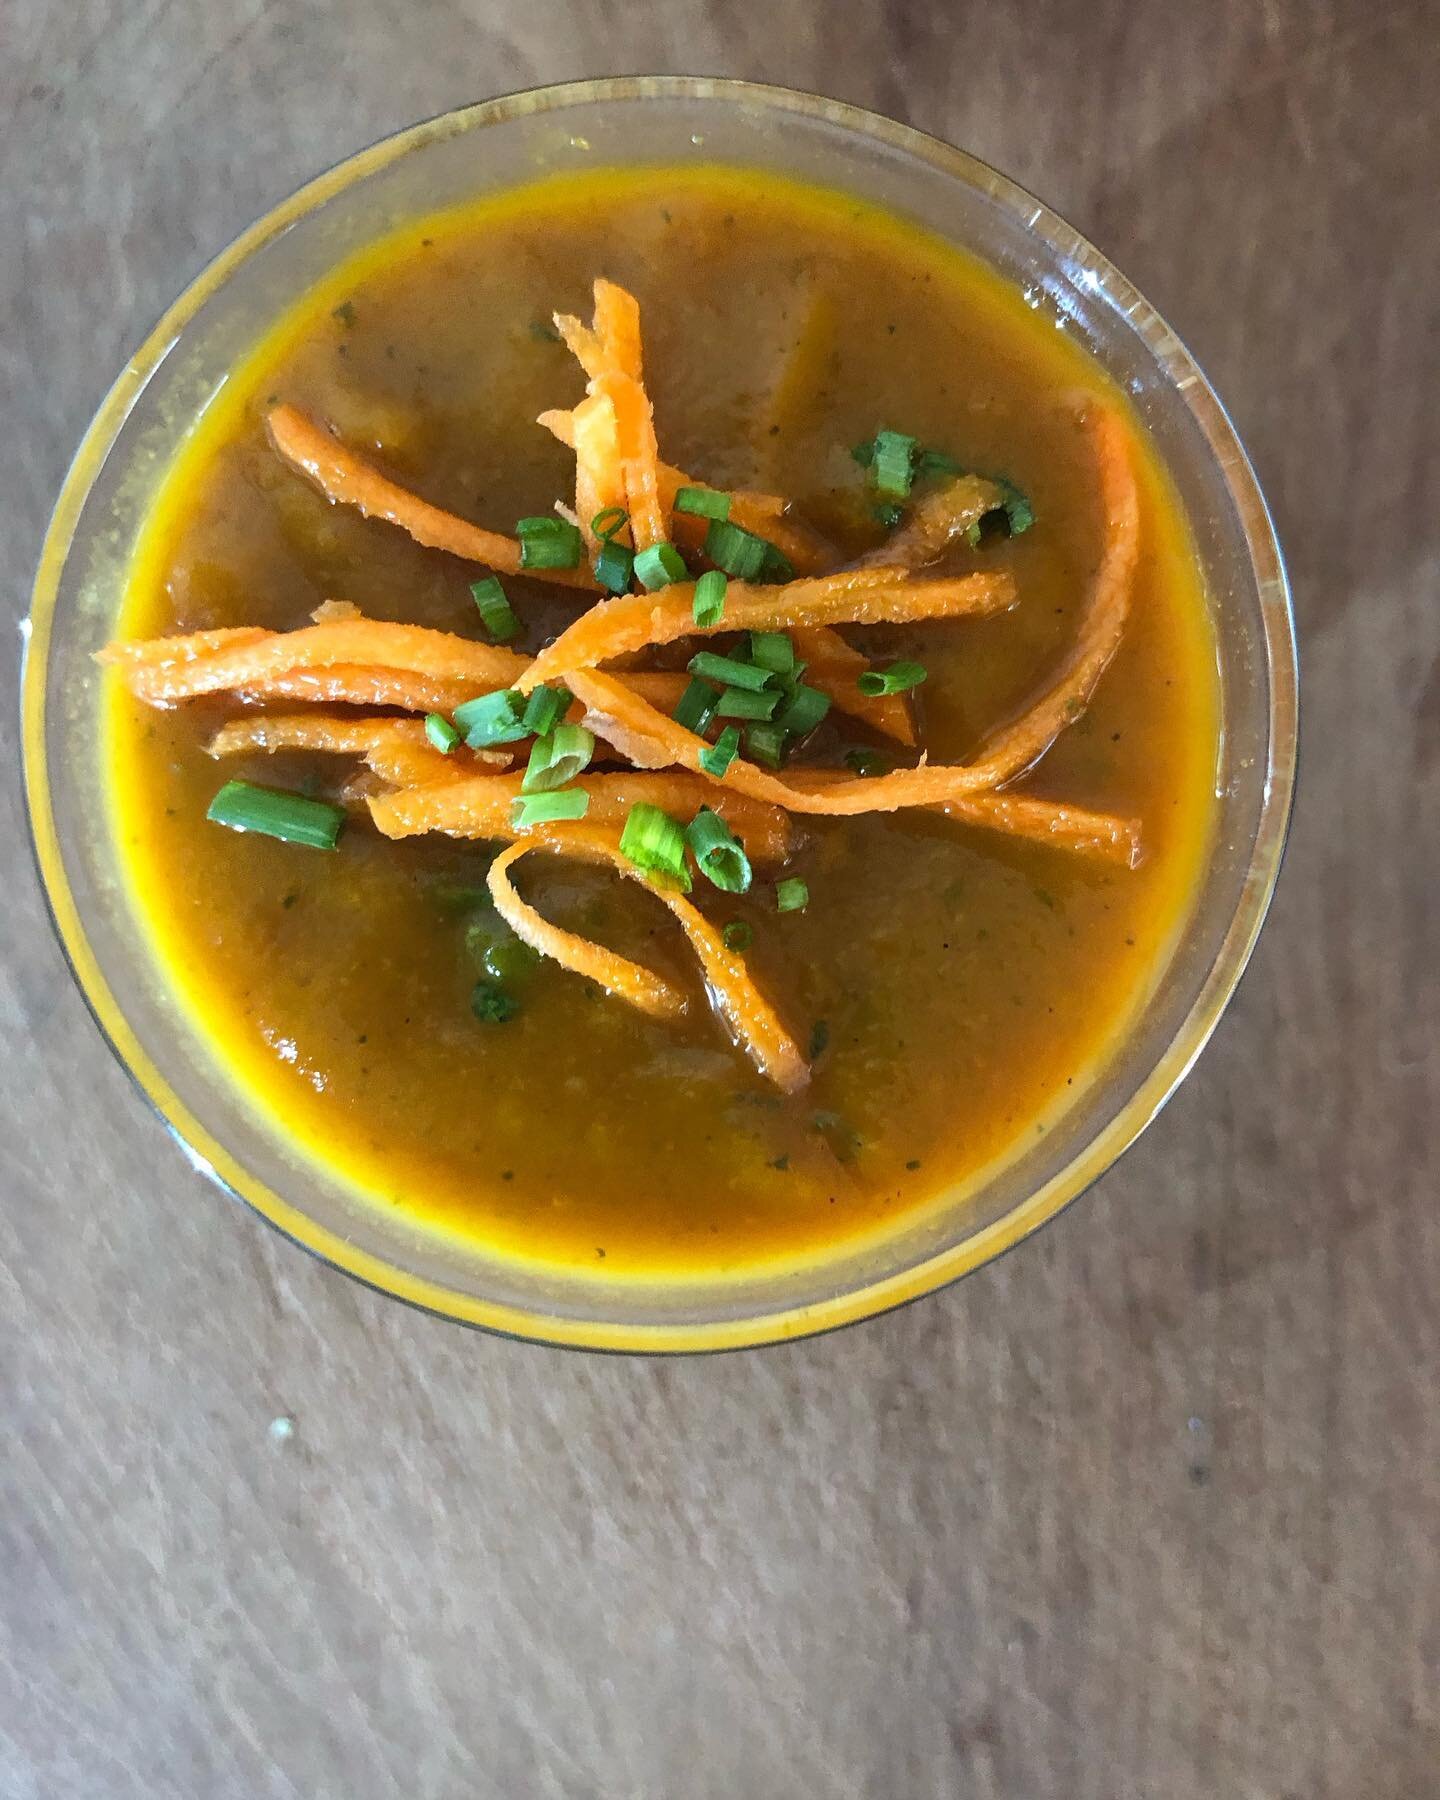 Chilled Summer Soups are back !
tangy roasted 🥕Organic Carrot Tomato  Garnsihed with fresh CHIVES
We have many ways to order !
Support small island business 
Earn discounts on healthy food by using our handy self-ordering Kiosks at our NEW Walk Up w